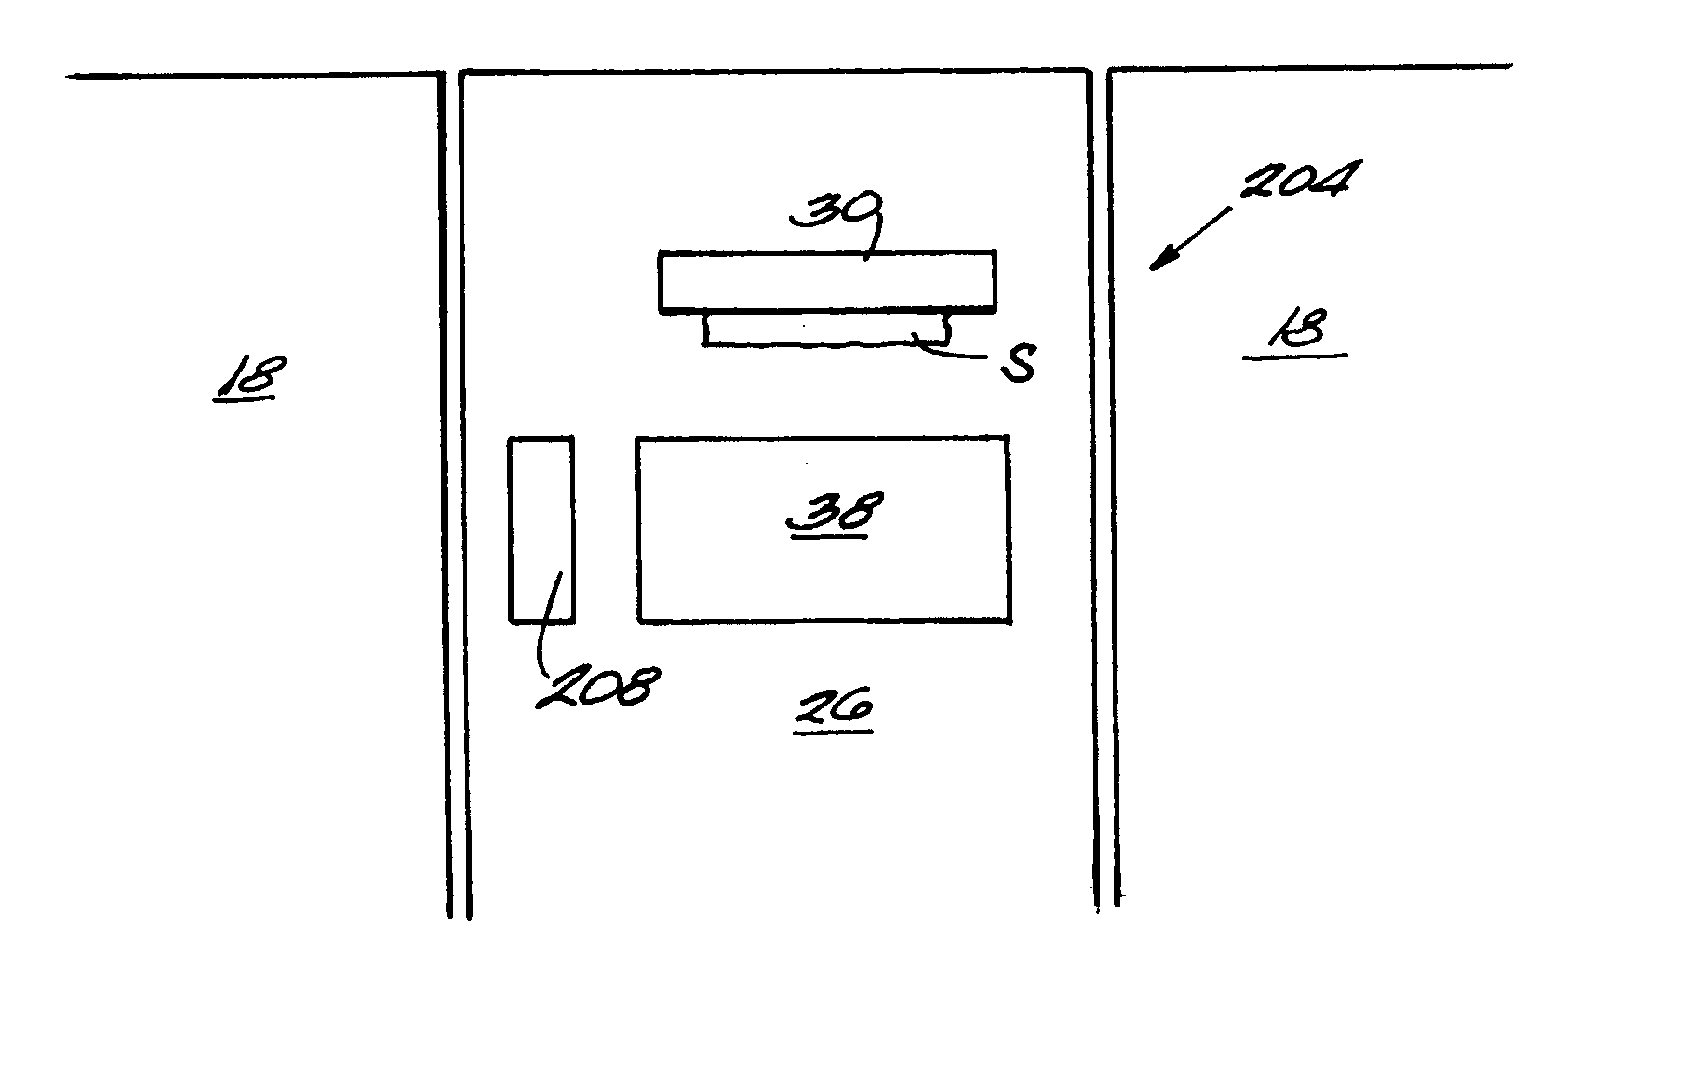 Apparatus for sanitary egress of a restroom